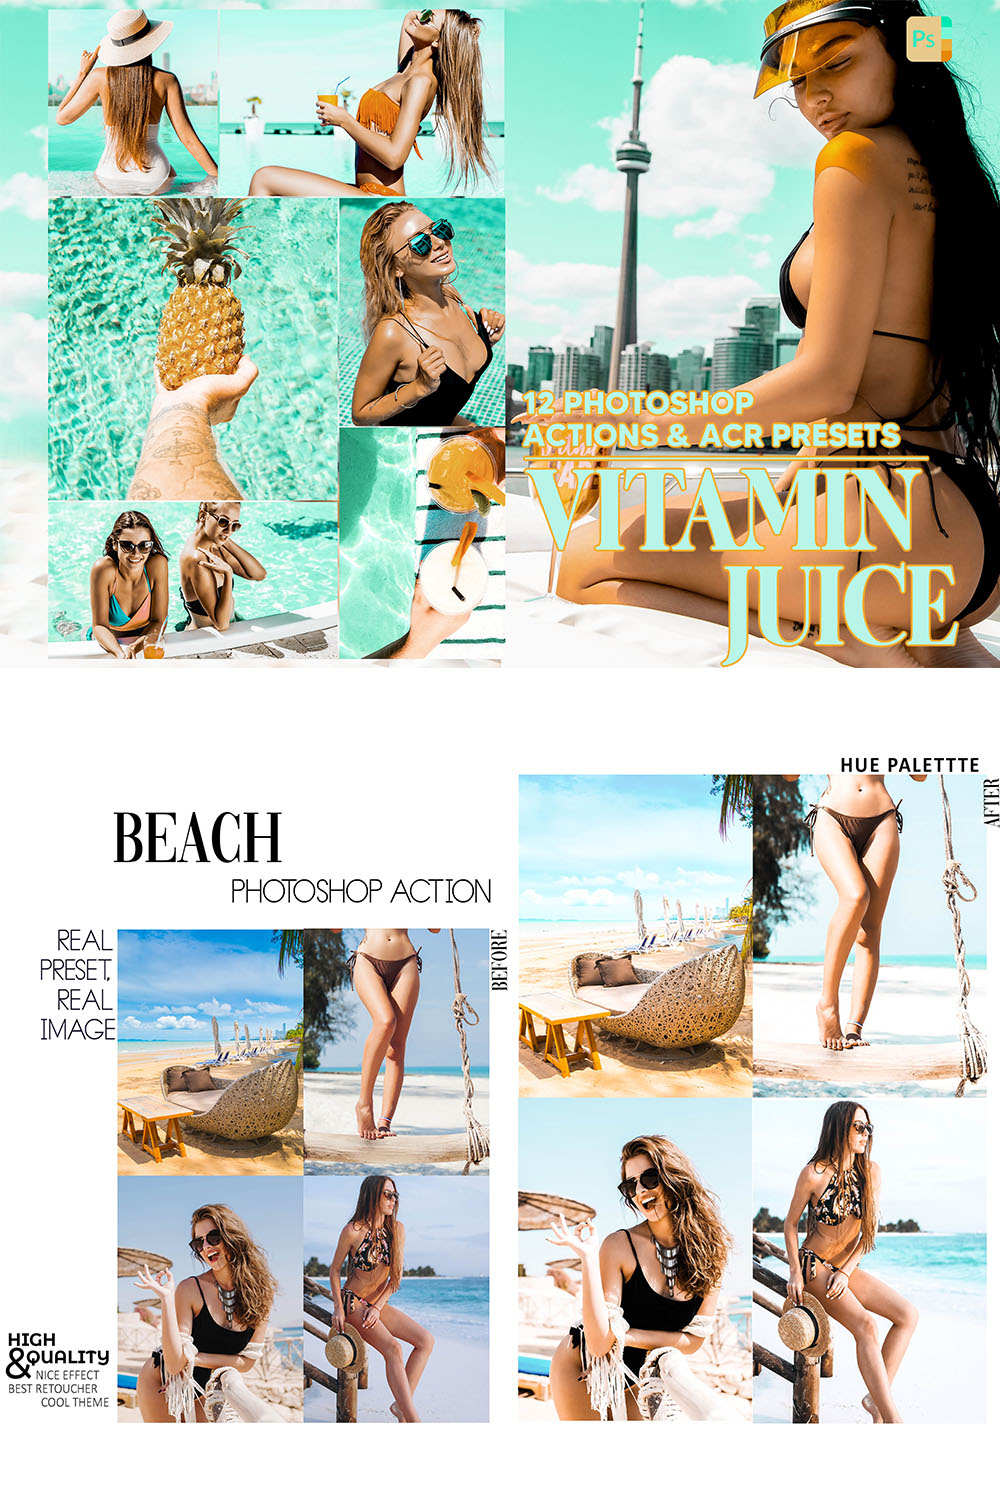 12 Photoshop Actions, Vitamin Juice Ps Action, Summer ACR Preset, Travel Ps Filter, Atn Portrait And Lifestyle Theme For Instagram, Blogger pinterest preview image.